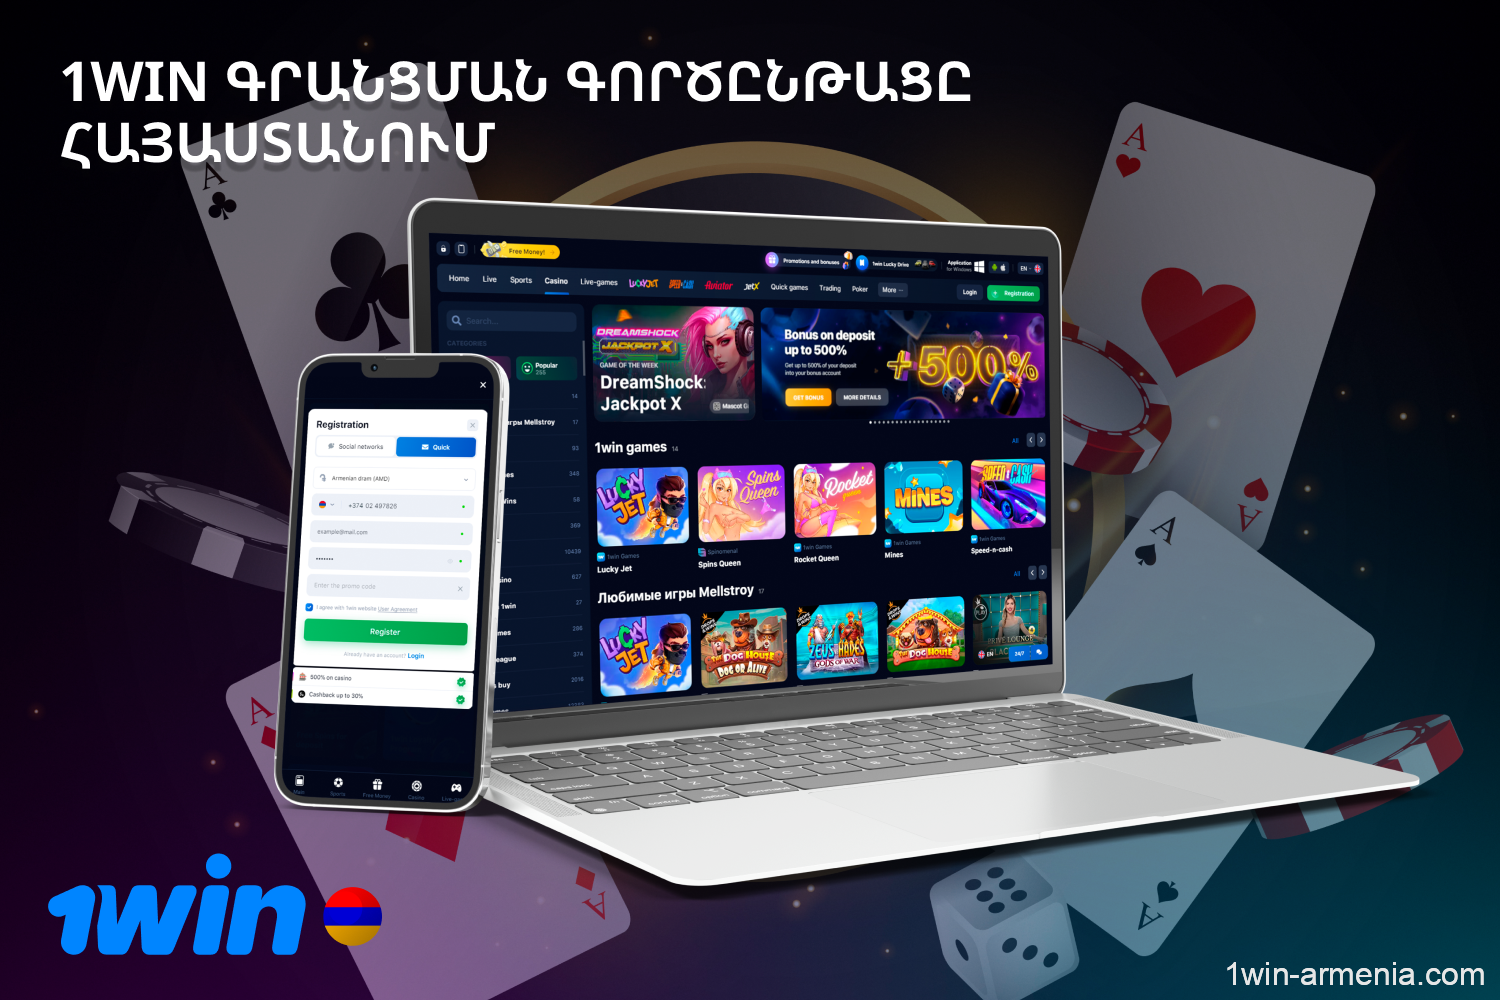 After registering with 1win, Armenian players have access to betting, a wide range of casino games and can take advantage of the welcome bonus